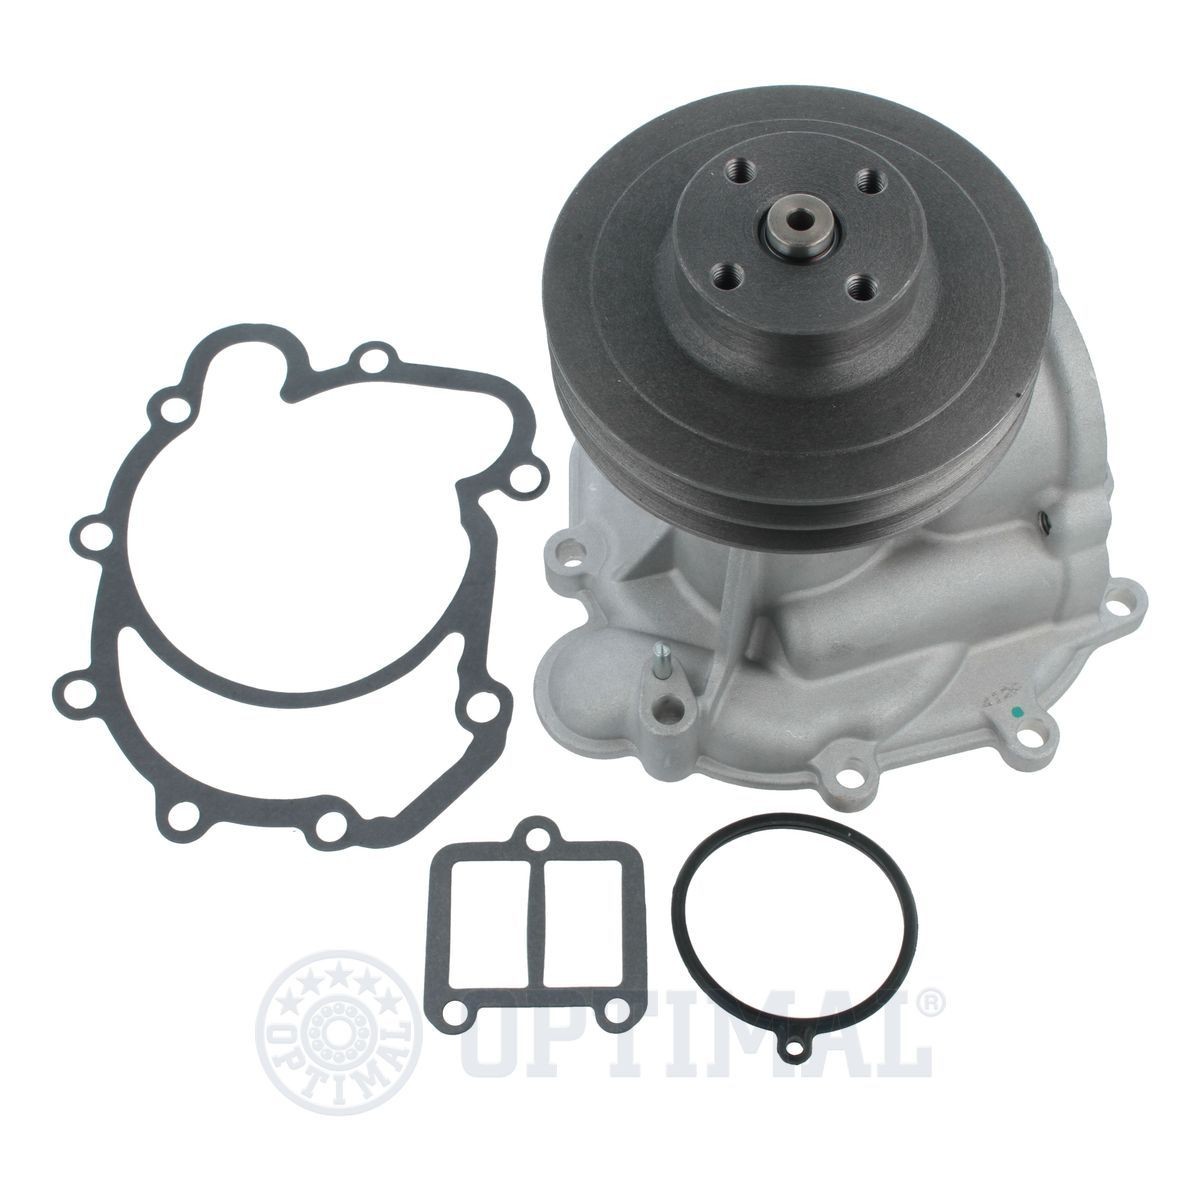 OPTIMAL AQ-1377 Water pump with double pulley, with gaskets/seals, Mechanical